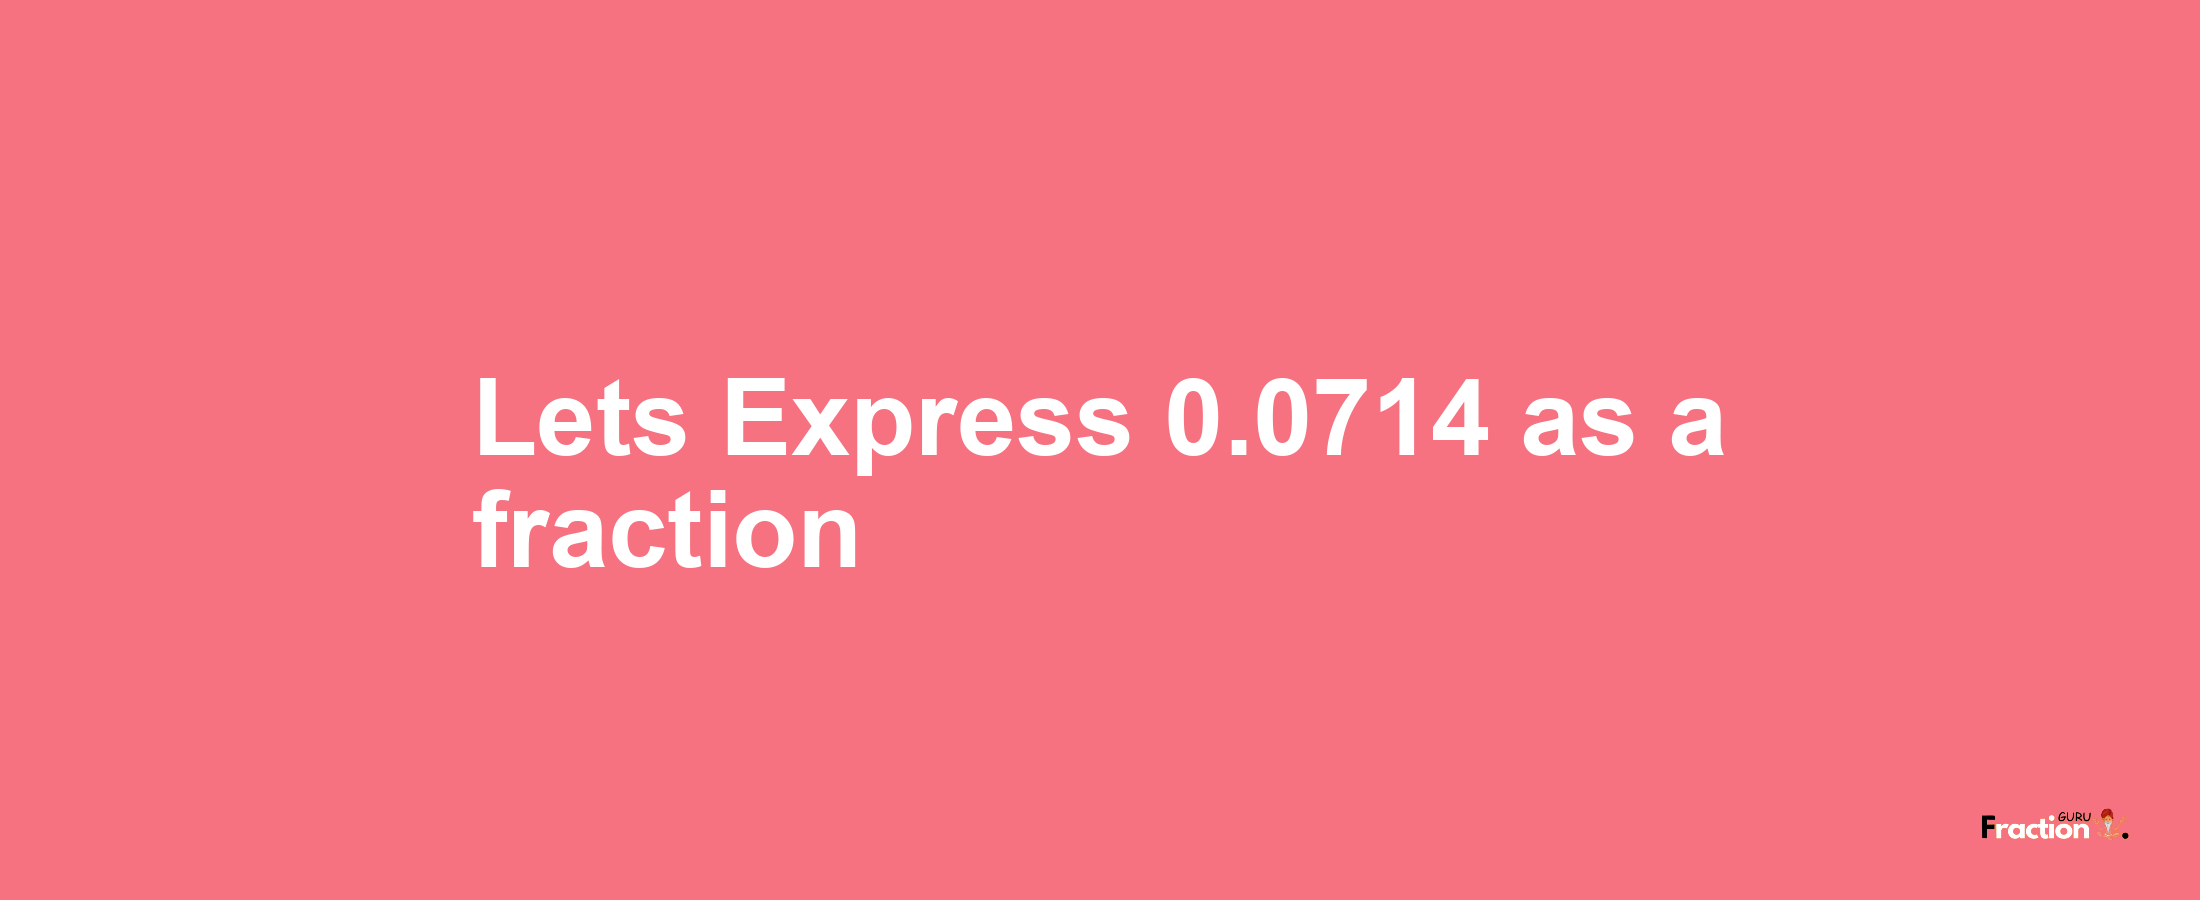 Lets Express 0.0714 as afraction